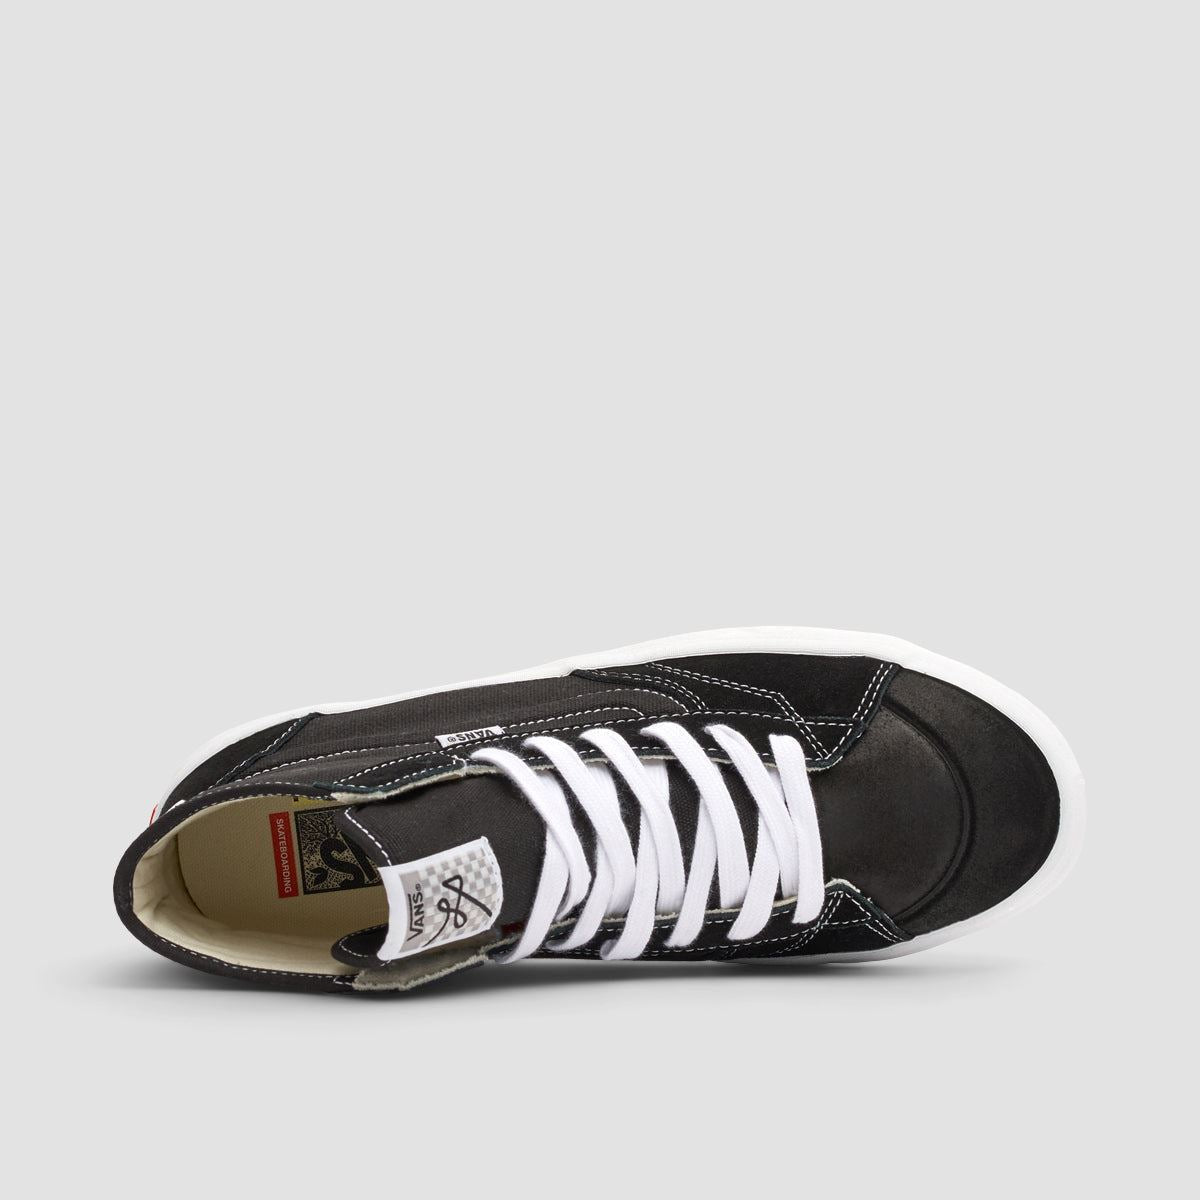 Vans The Lizzie High Top Shoes - Black/White